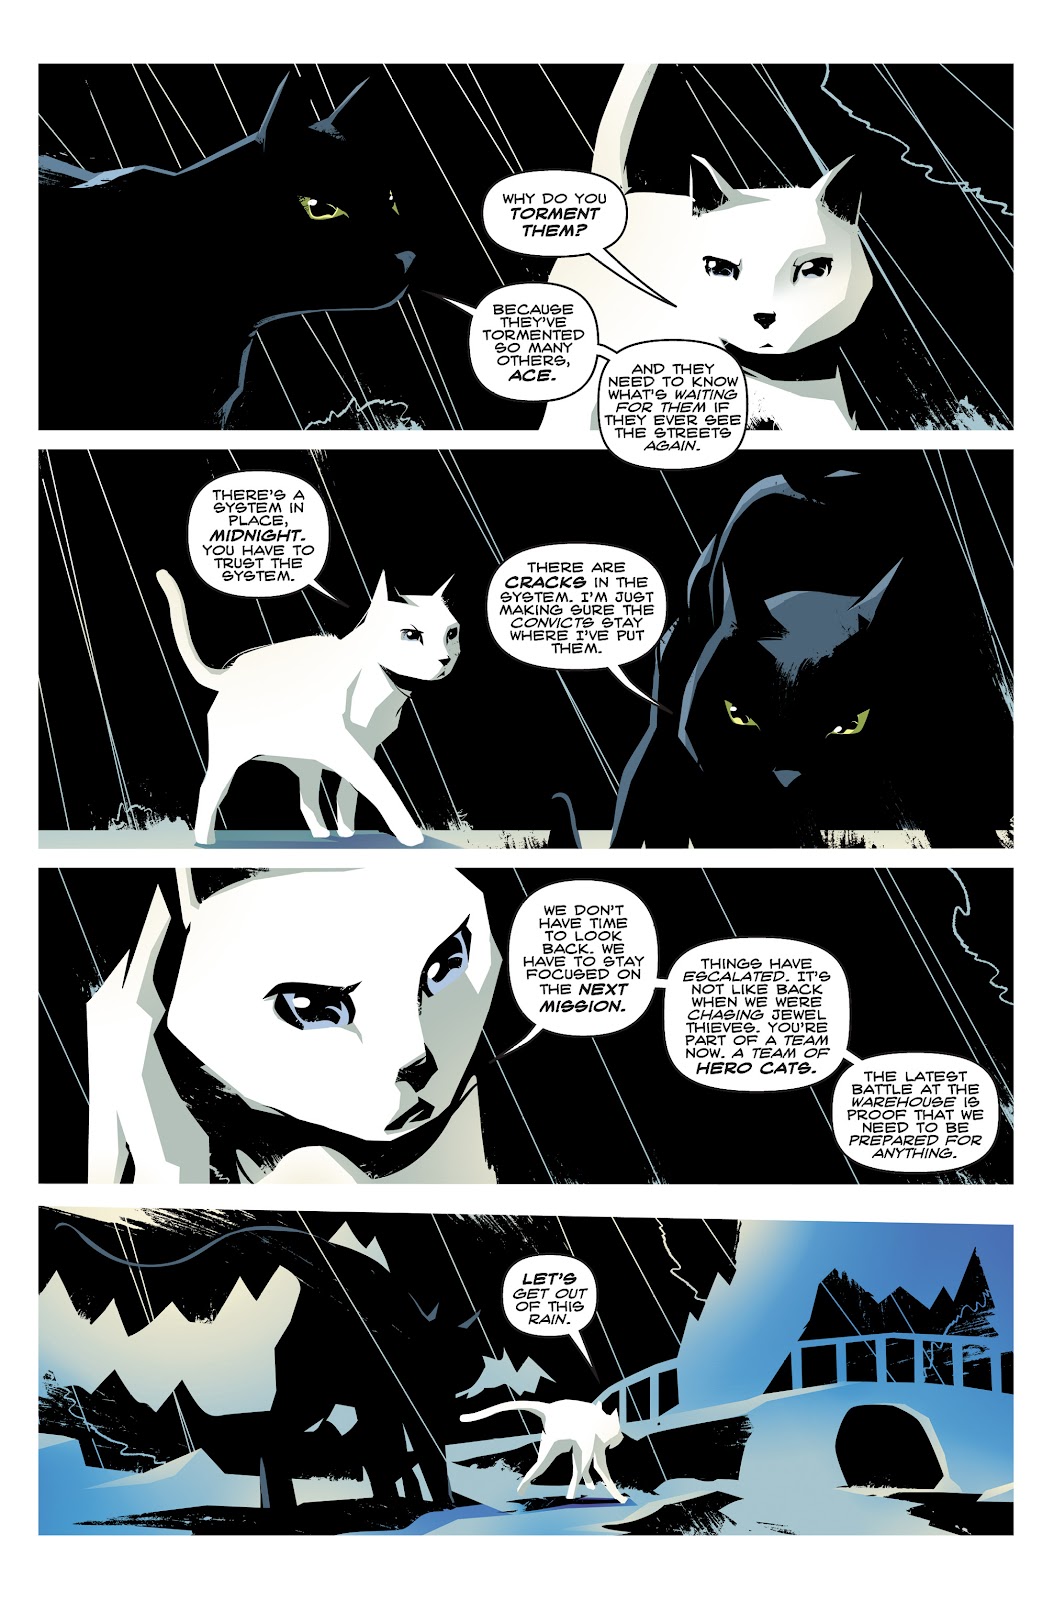 Hero Cats: Midnight Over Stellar City Vol. 2 issue 1 - Page 6